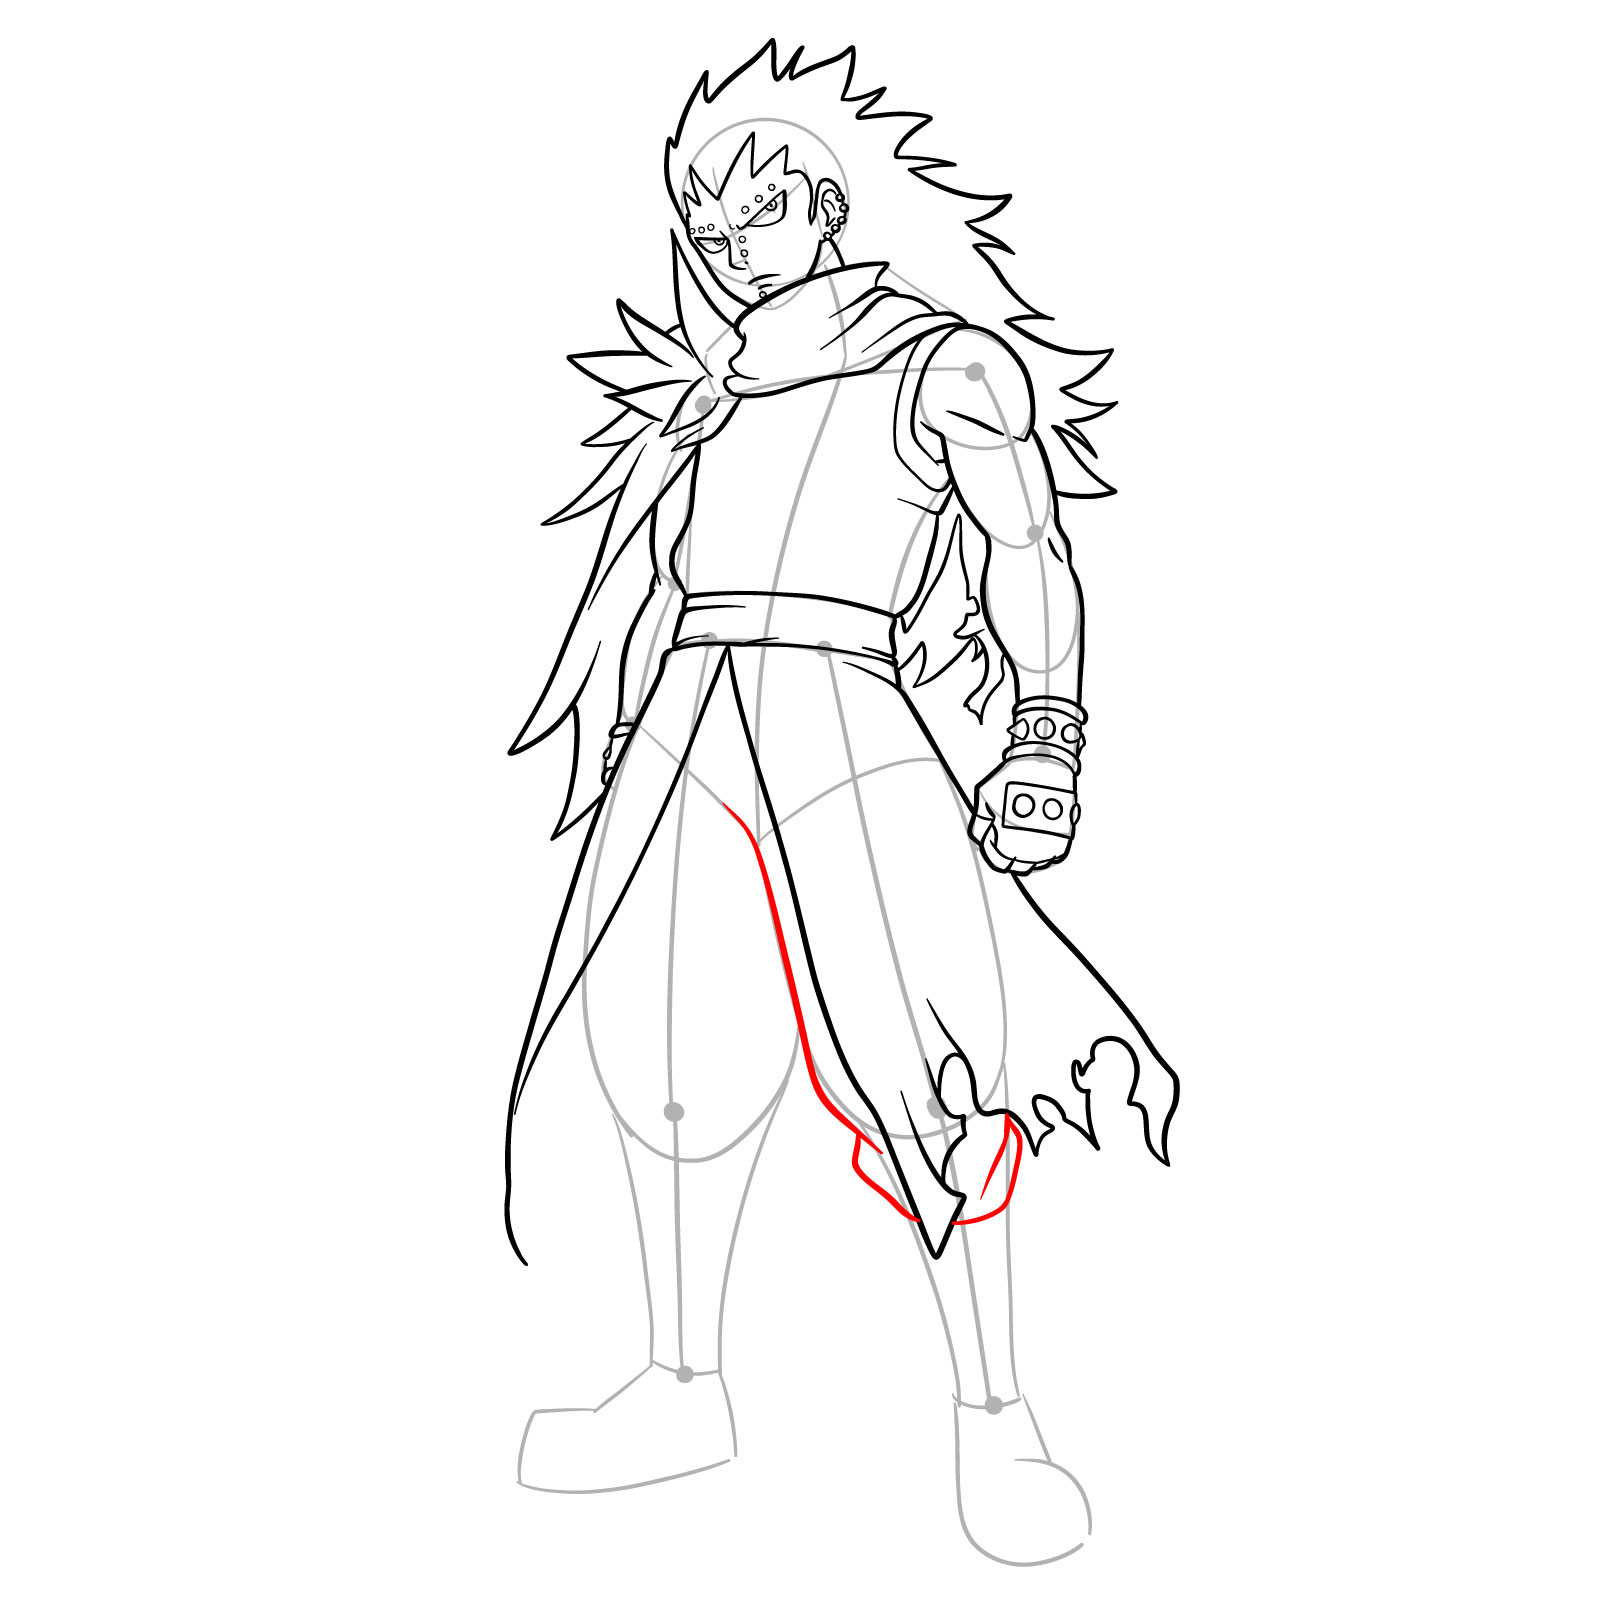 How to draw Gajeel Redfox from Fairy Tail - step 31